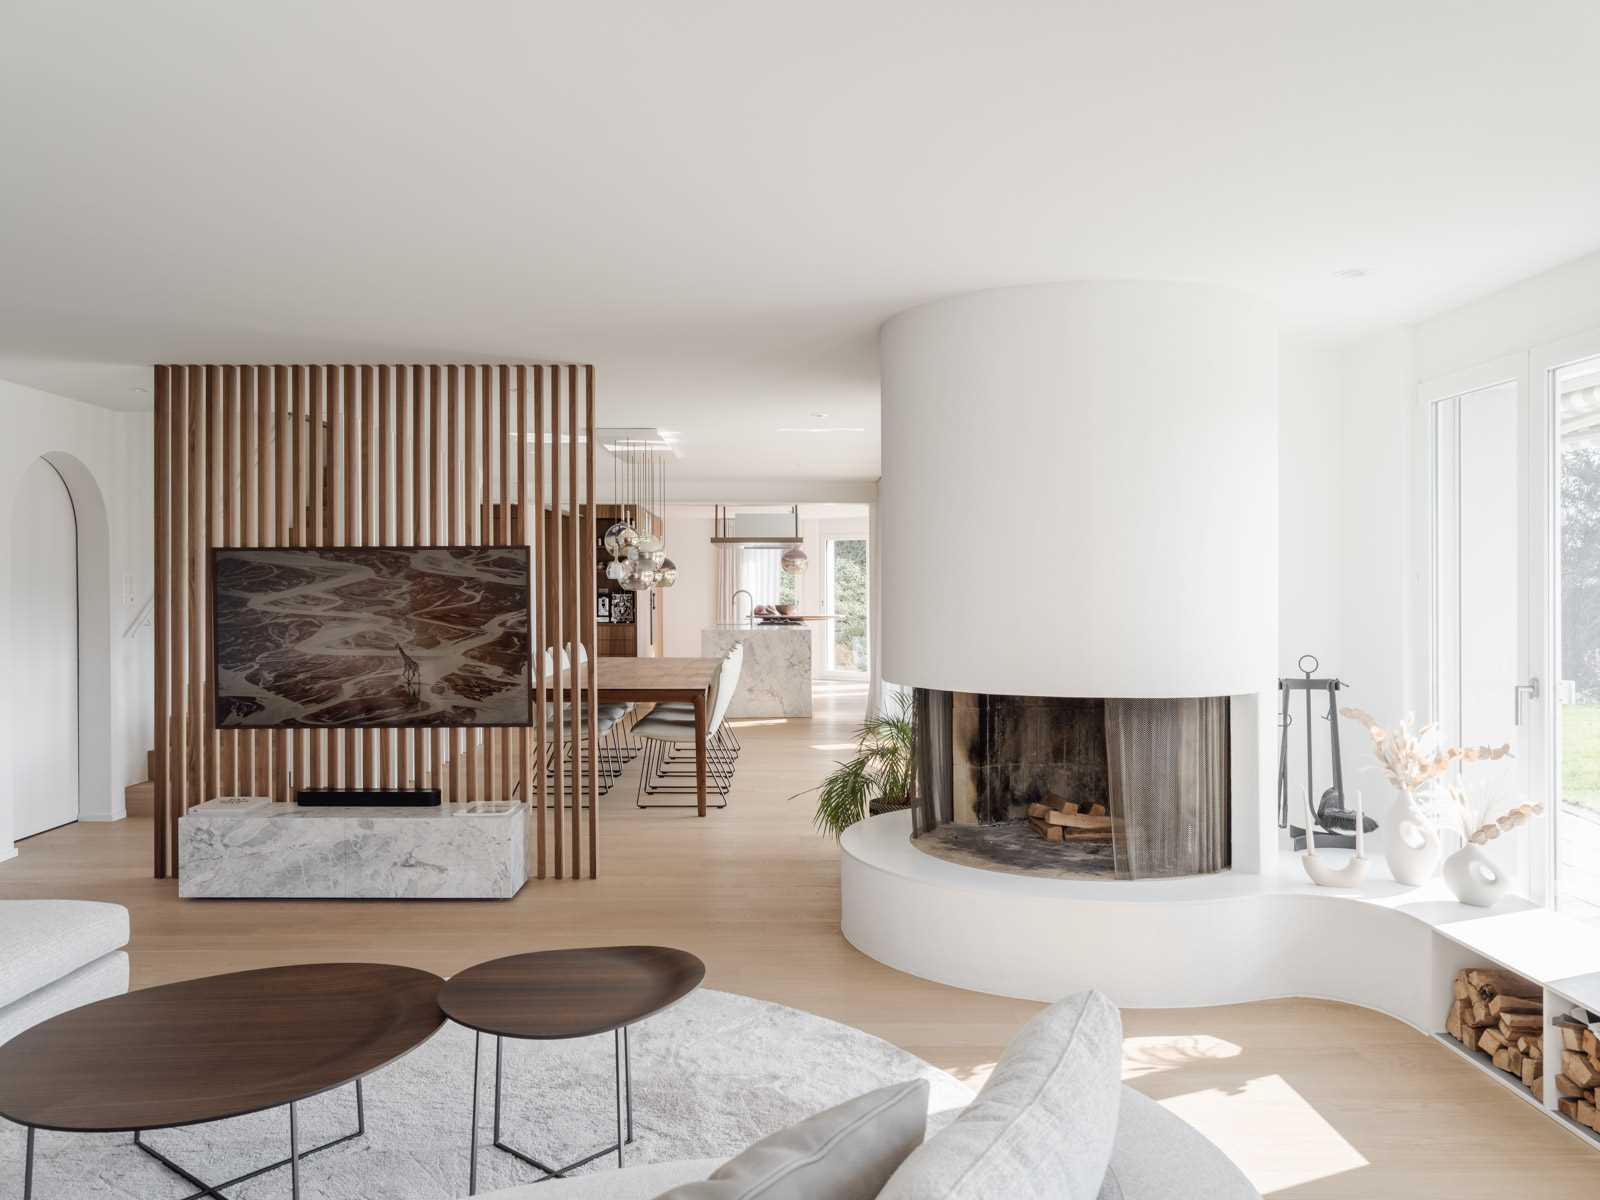 This modern living room includes a rounded fireplace and a wood slat tv wall that acts as a partition with the dining area, and somewhat hides the stairs from view.